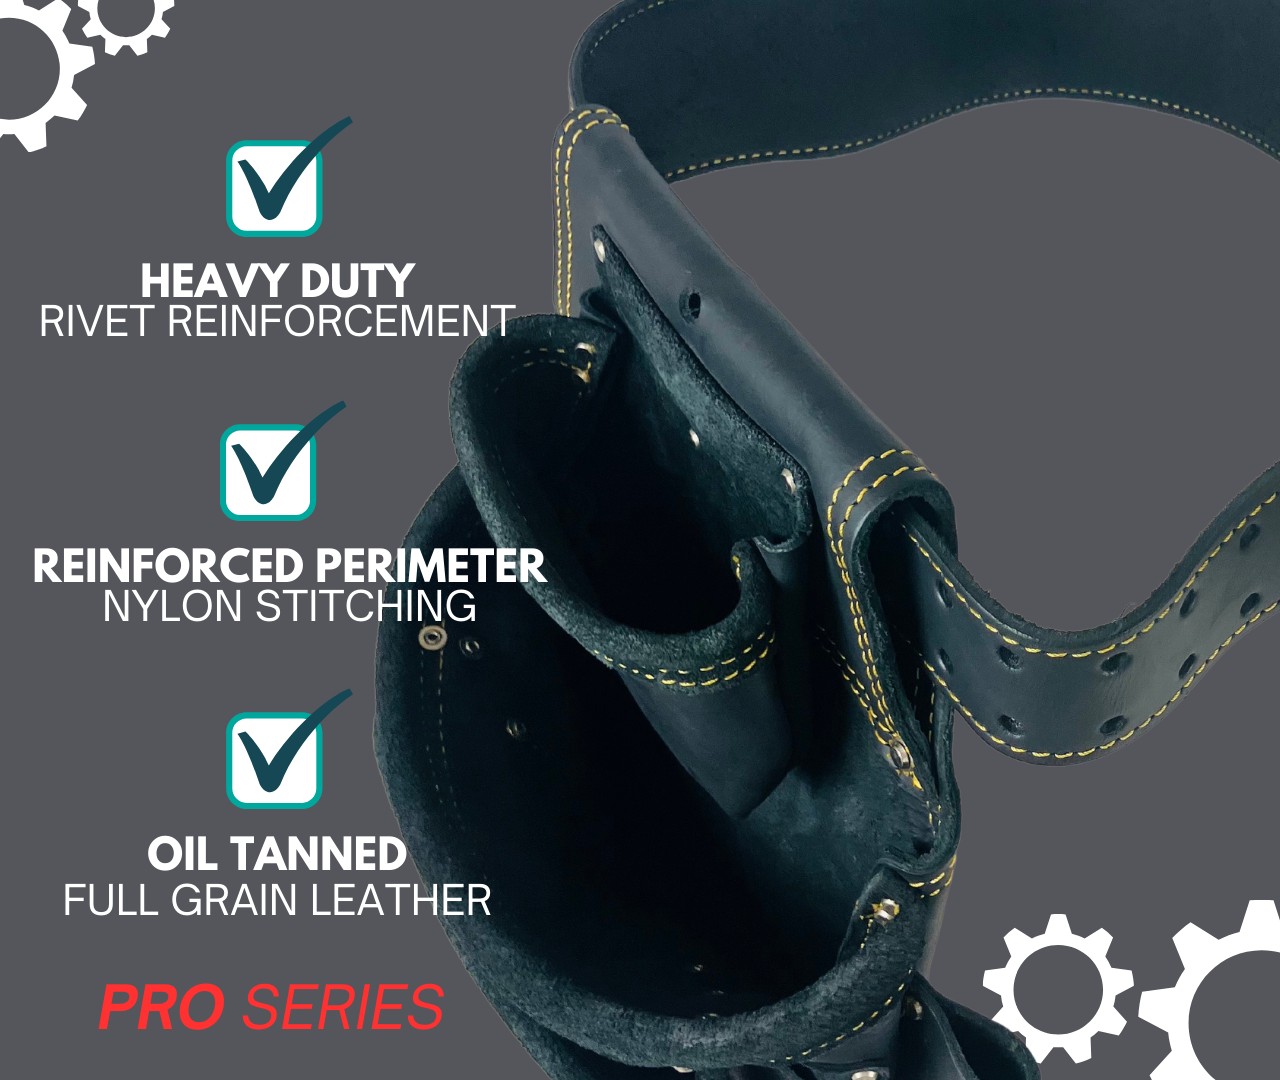 3" Black Work Tool Belt in Oil Tanned Top Grain Leather | Heavy Duty - Durable and Rugged | PRO Series